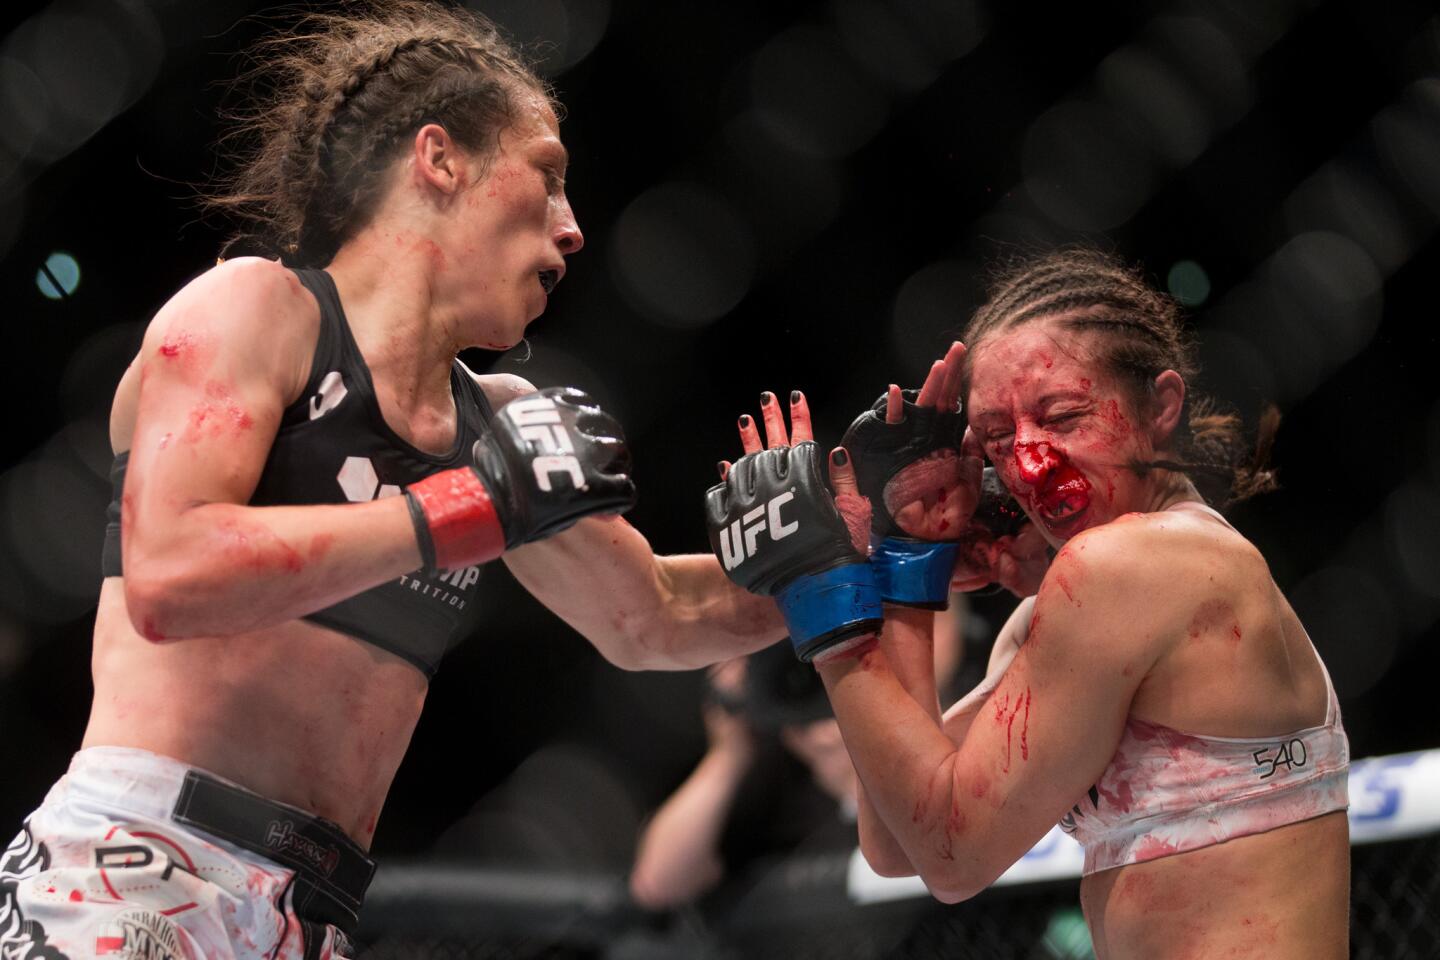 Joanna Jedrzejczyk, left, battles with Jessica Pennei for the women's strawweight title fight during UFC Fight Night in Berlin, Germany, Saturday, June 20, 2015. Jedrzejczyk defeated Pennei through KO/TKO.(AP Photo/Axel Schmidt)